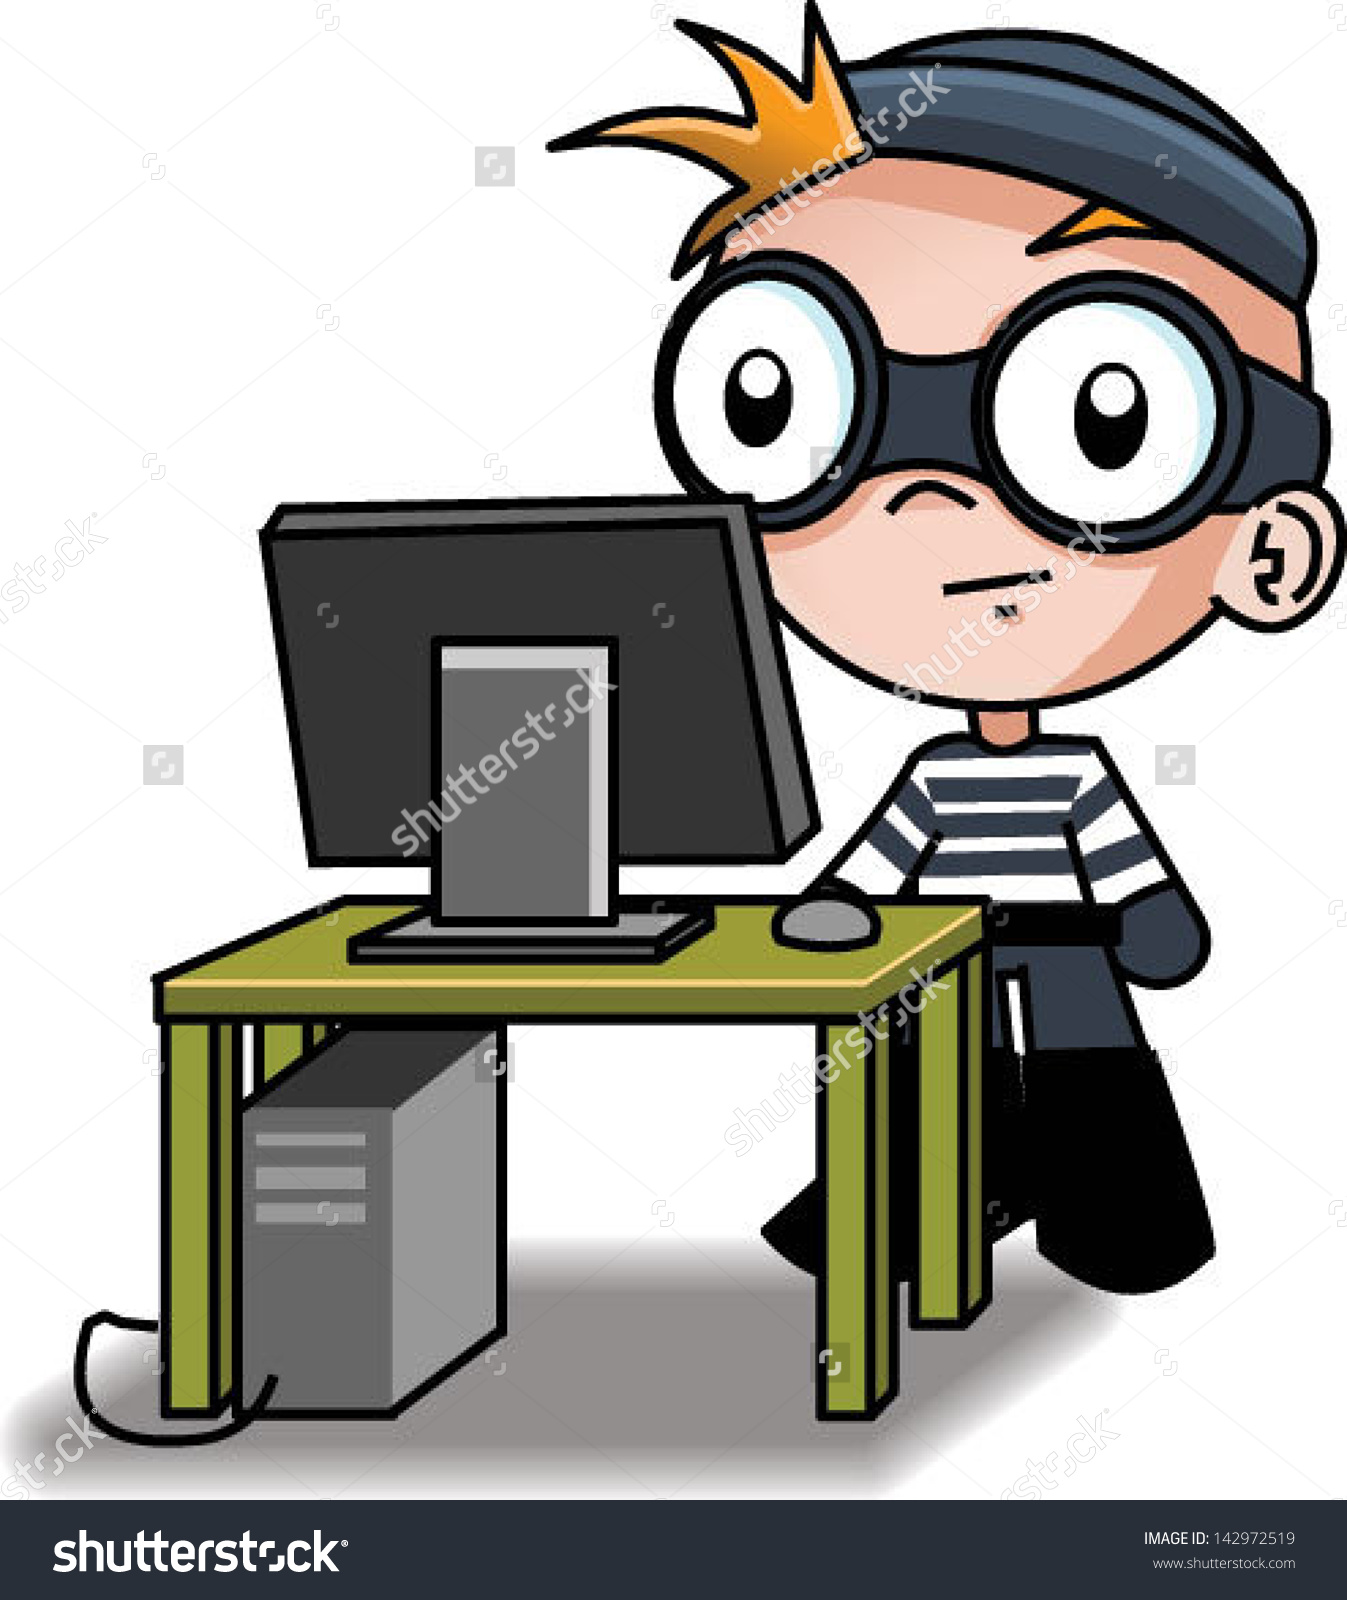 computer hacking clipart - photo #8